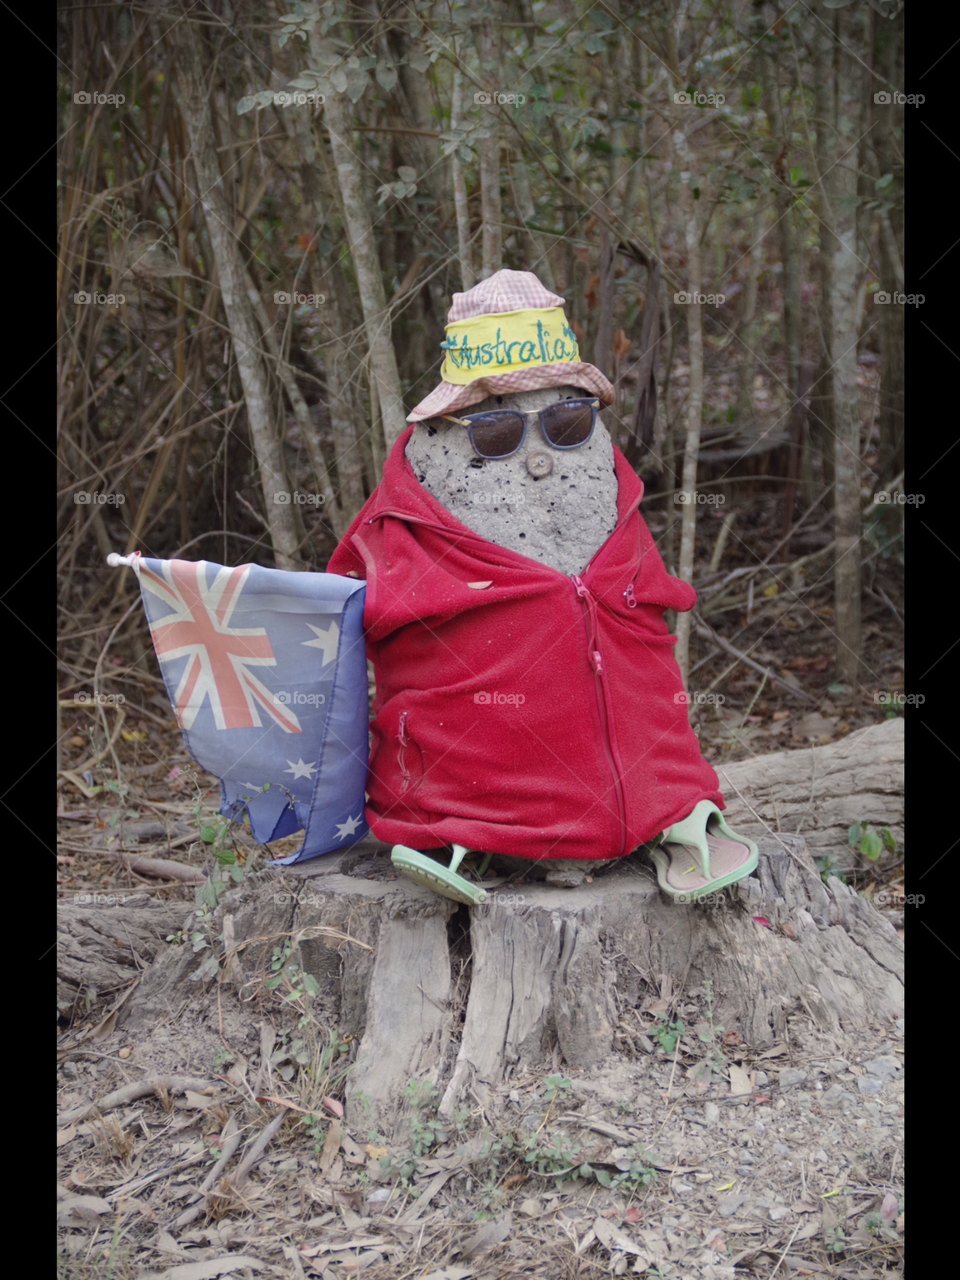 A termite nest has been decorated to be an Aussie character. 